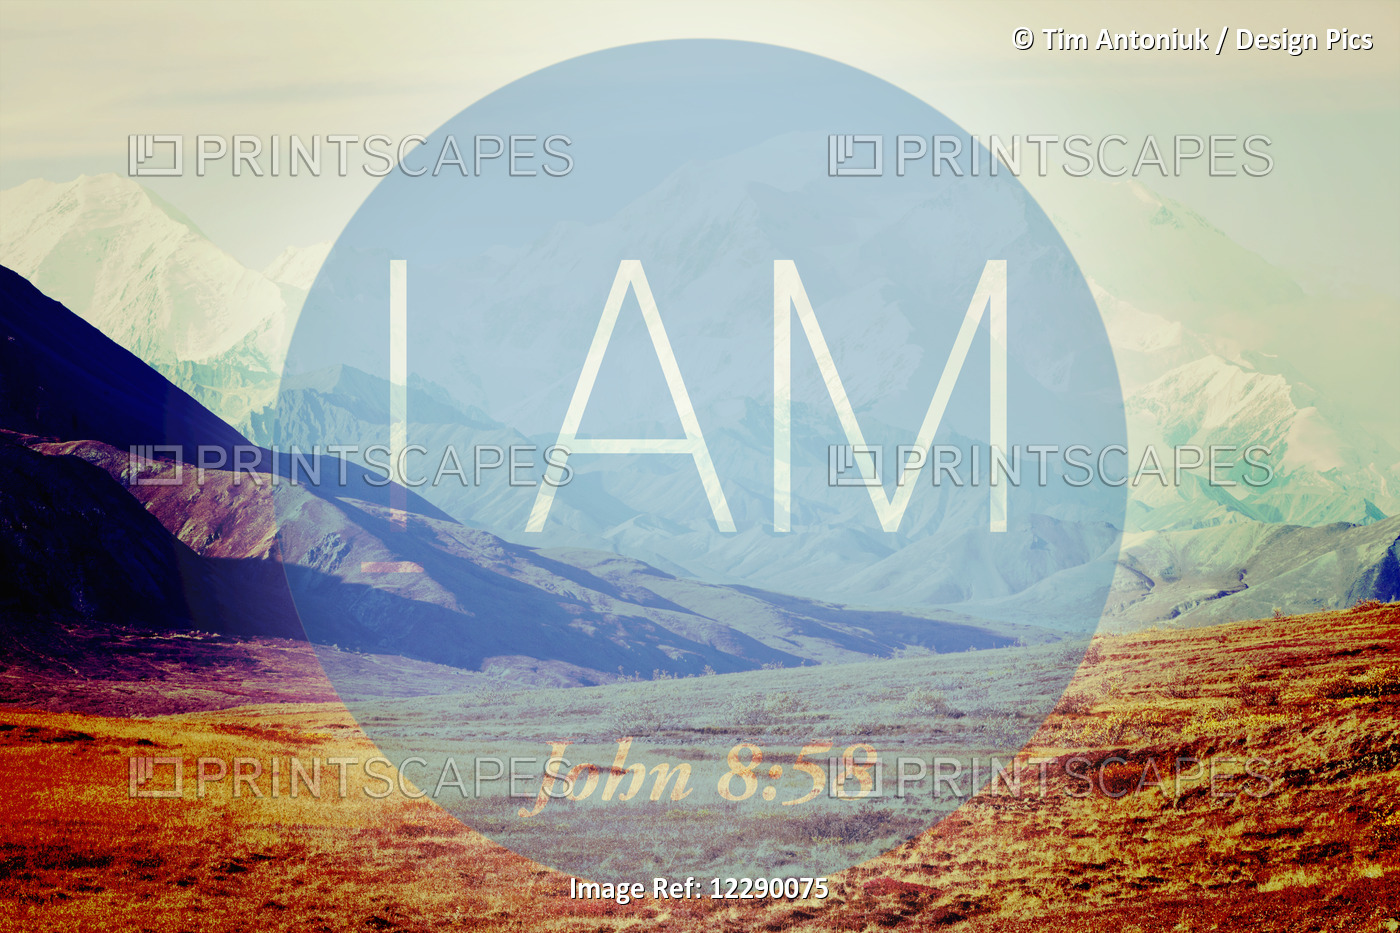 Image With A Landscape Of Rugged Mountain Peaks And A Scripture From John 8:58